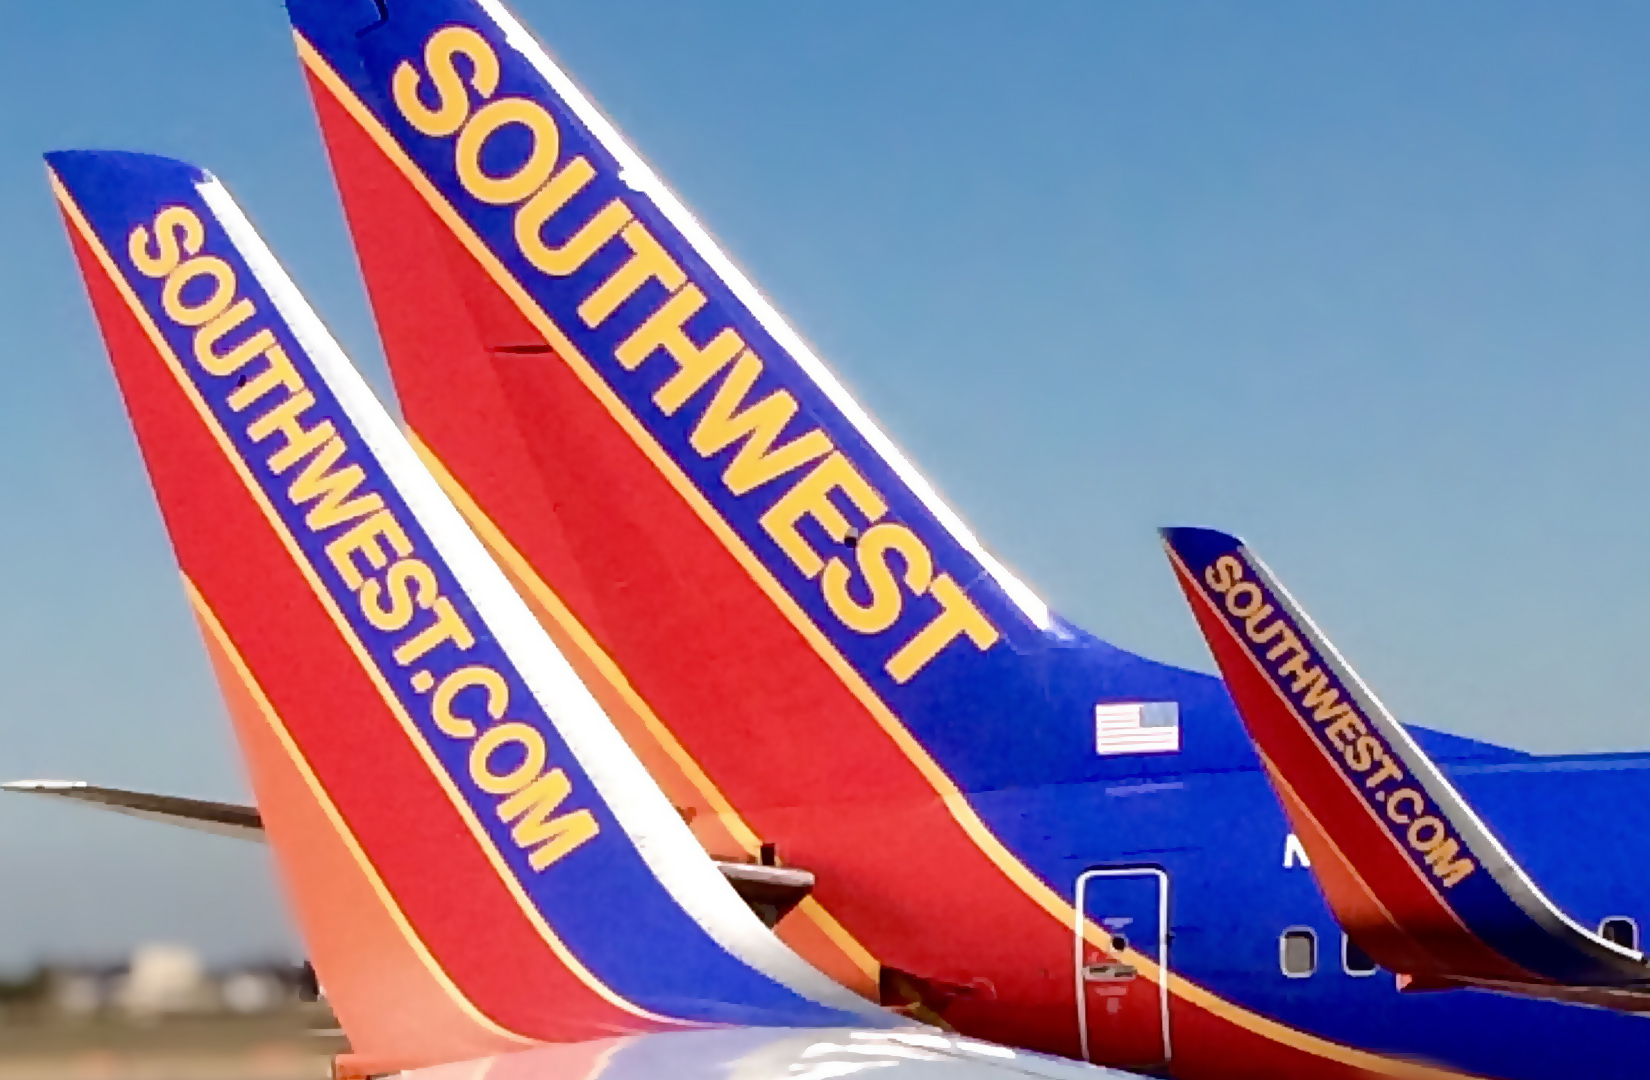 will southwest rebook on another airline